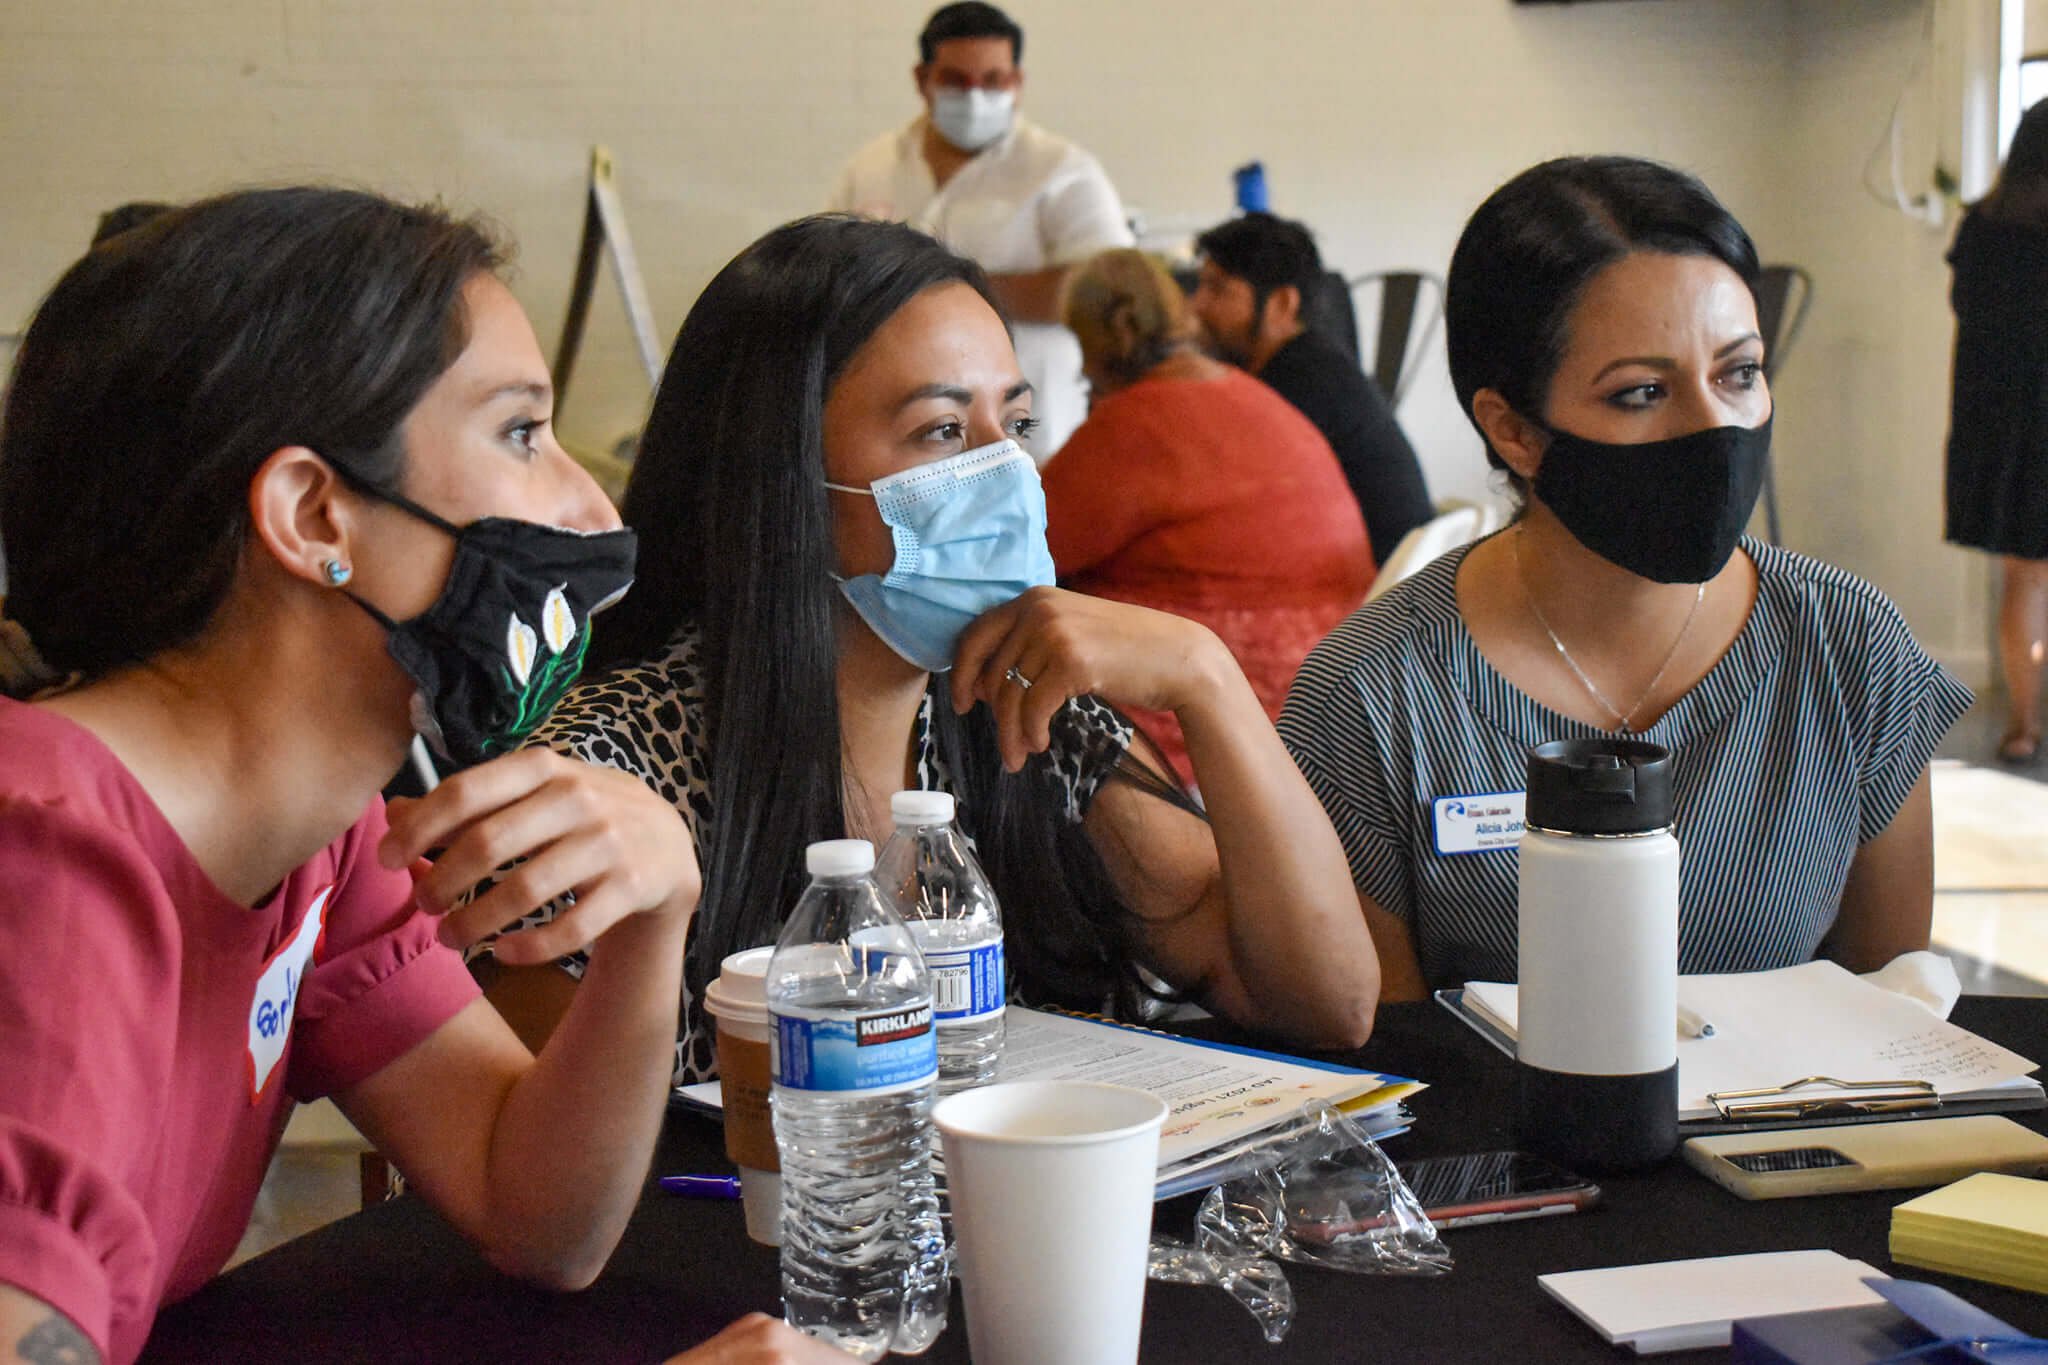 Three women of color with masks on having a discussion around a table